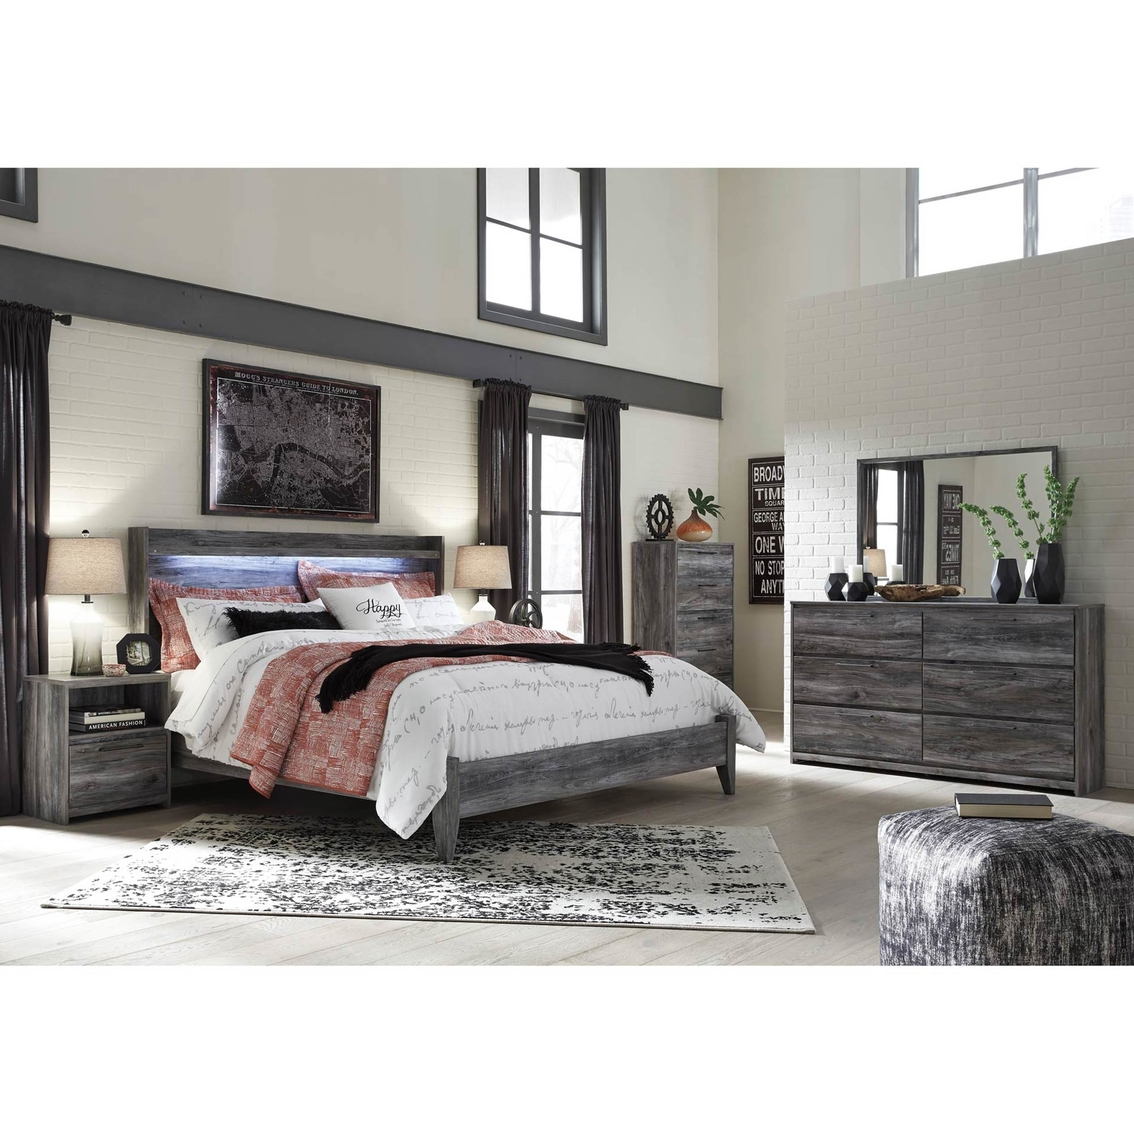 Signature Design by Ashley Baystorm Panel Bed 5 pc. Set - Image 2 of 2